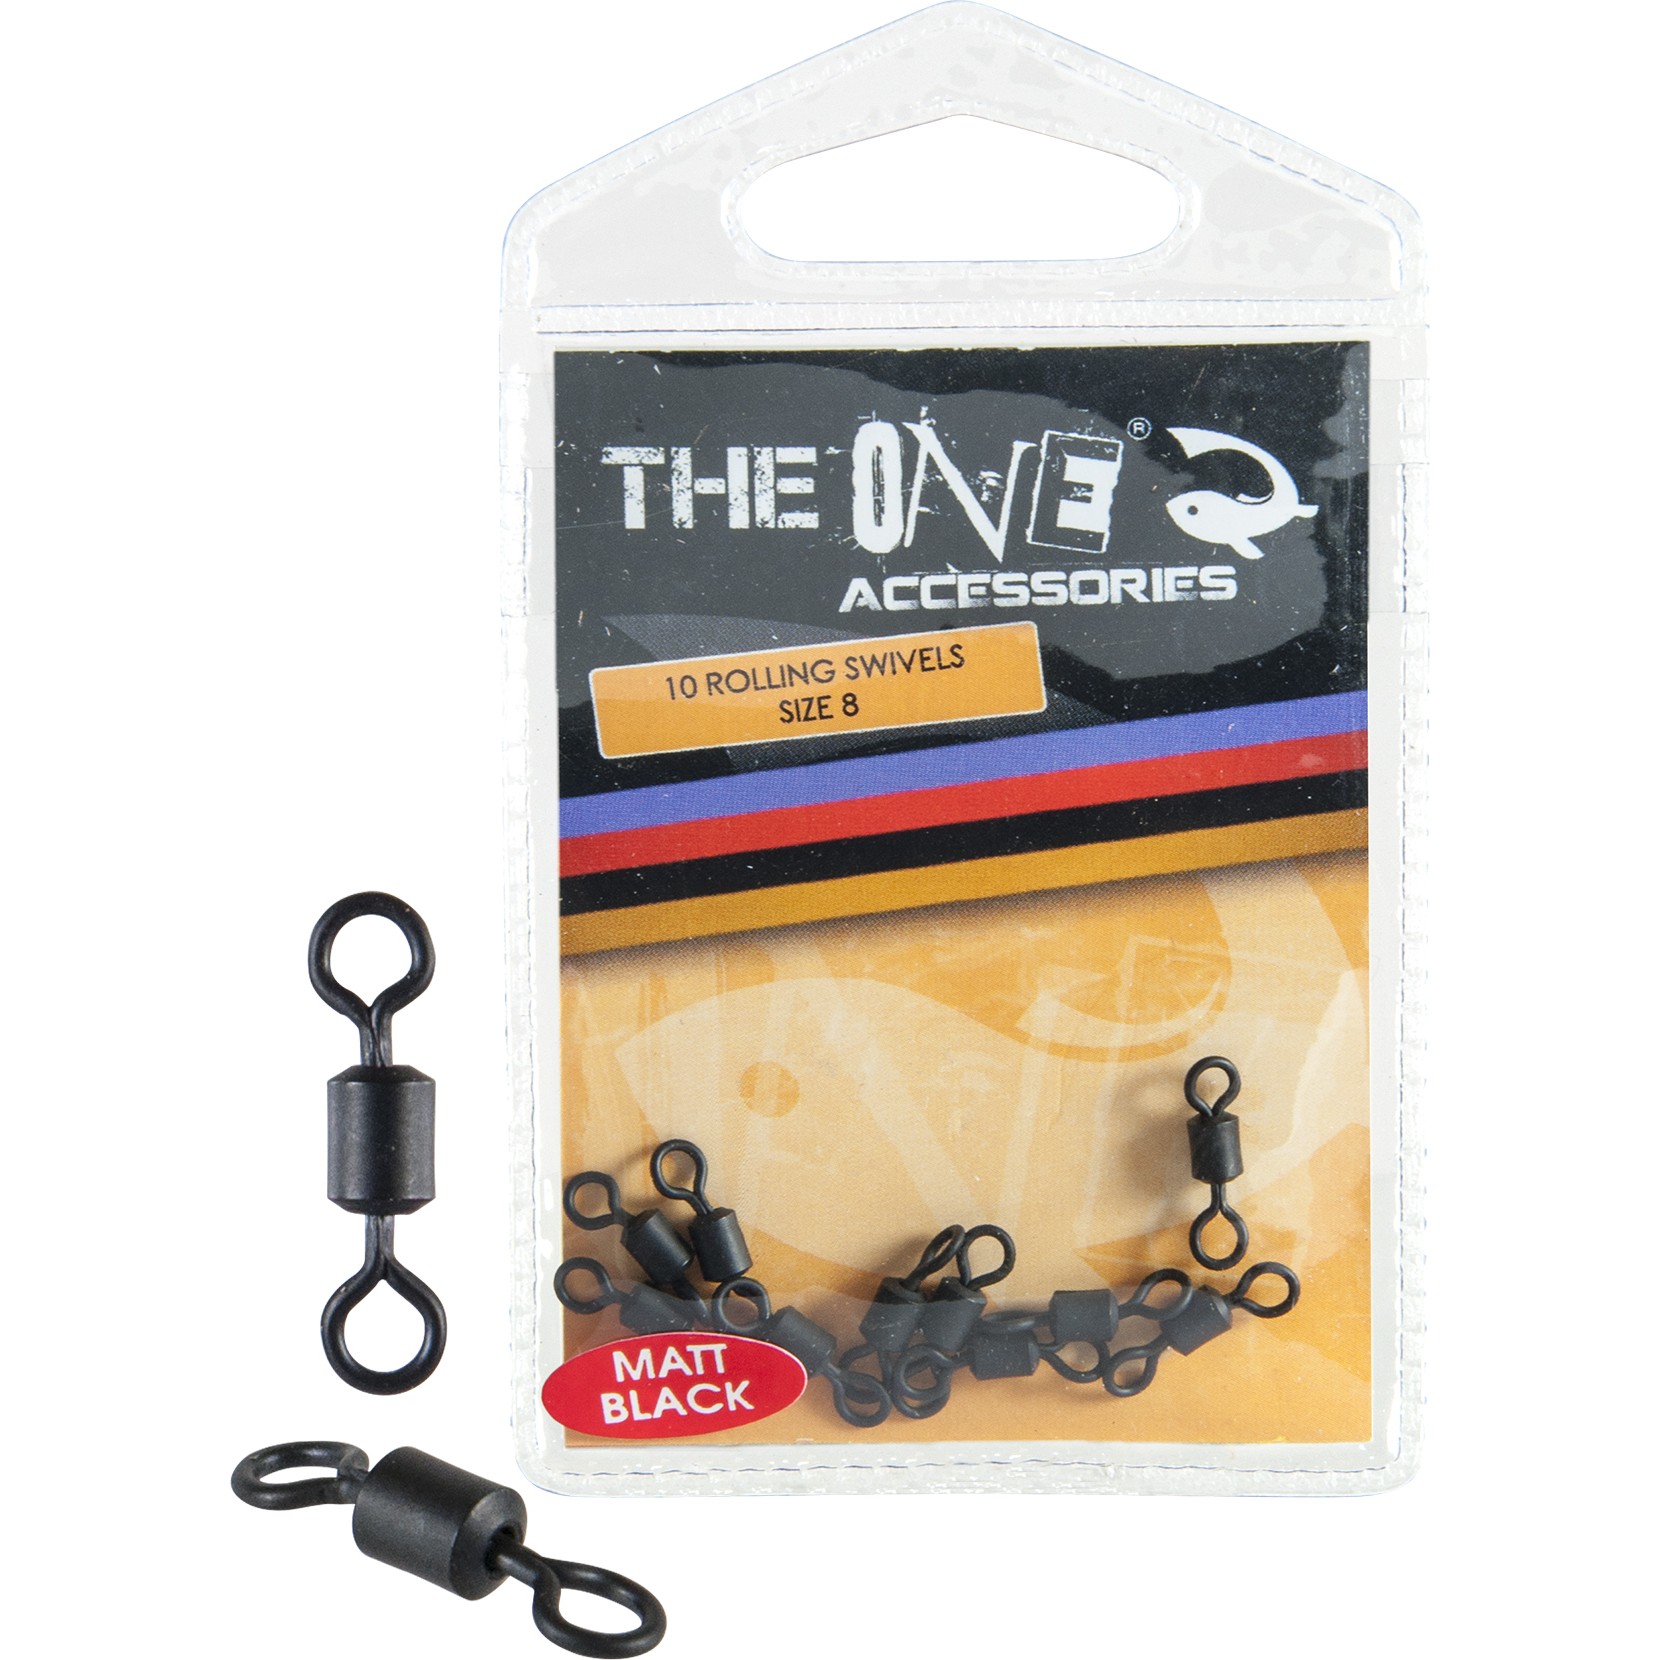 VARTEJ THE ONE ROLLING SWIVELS No.8 - 82199608